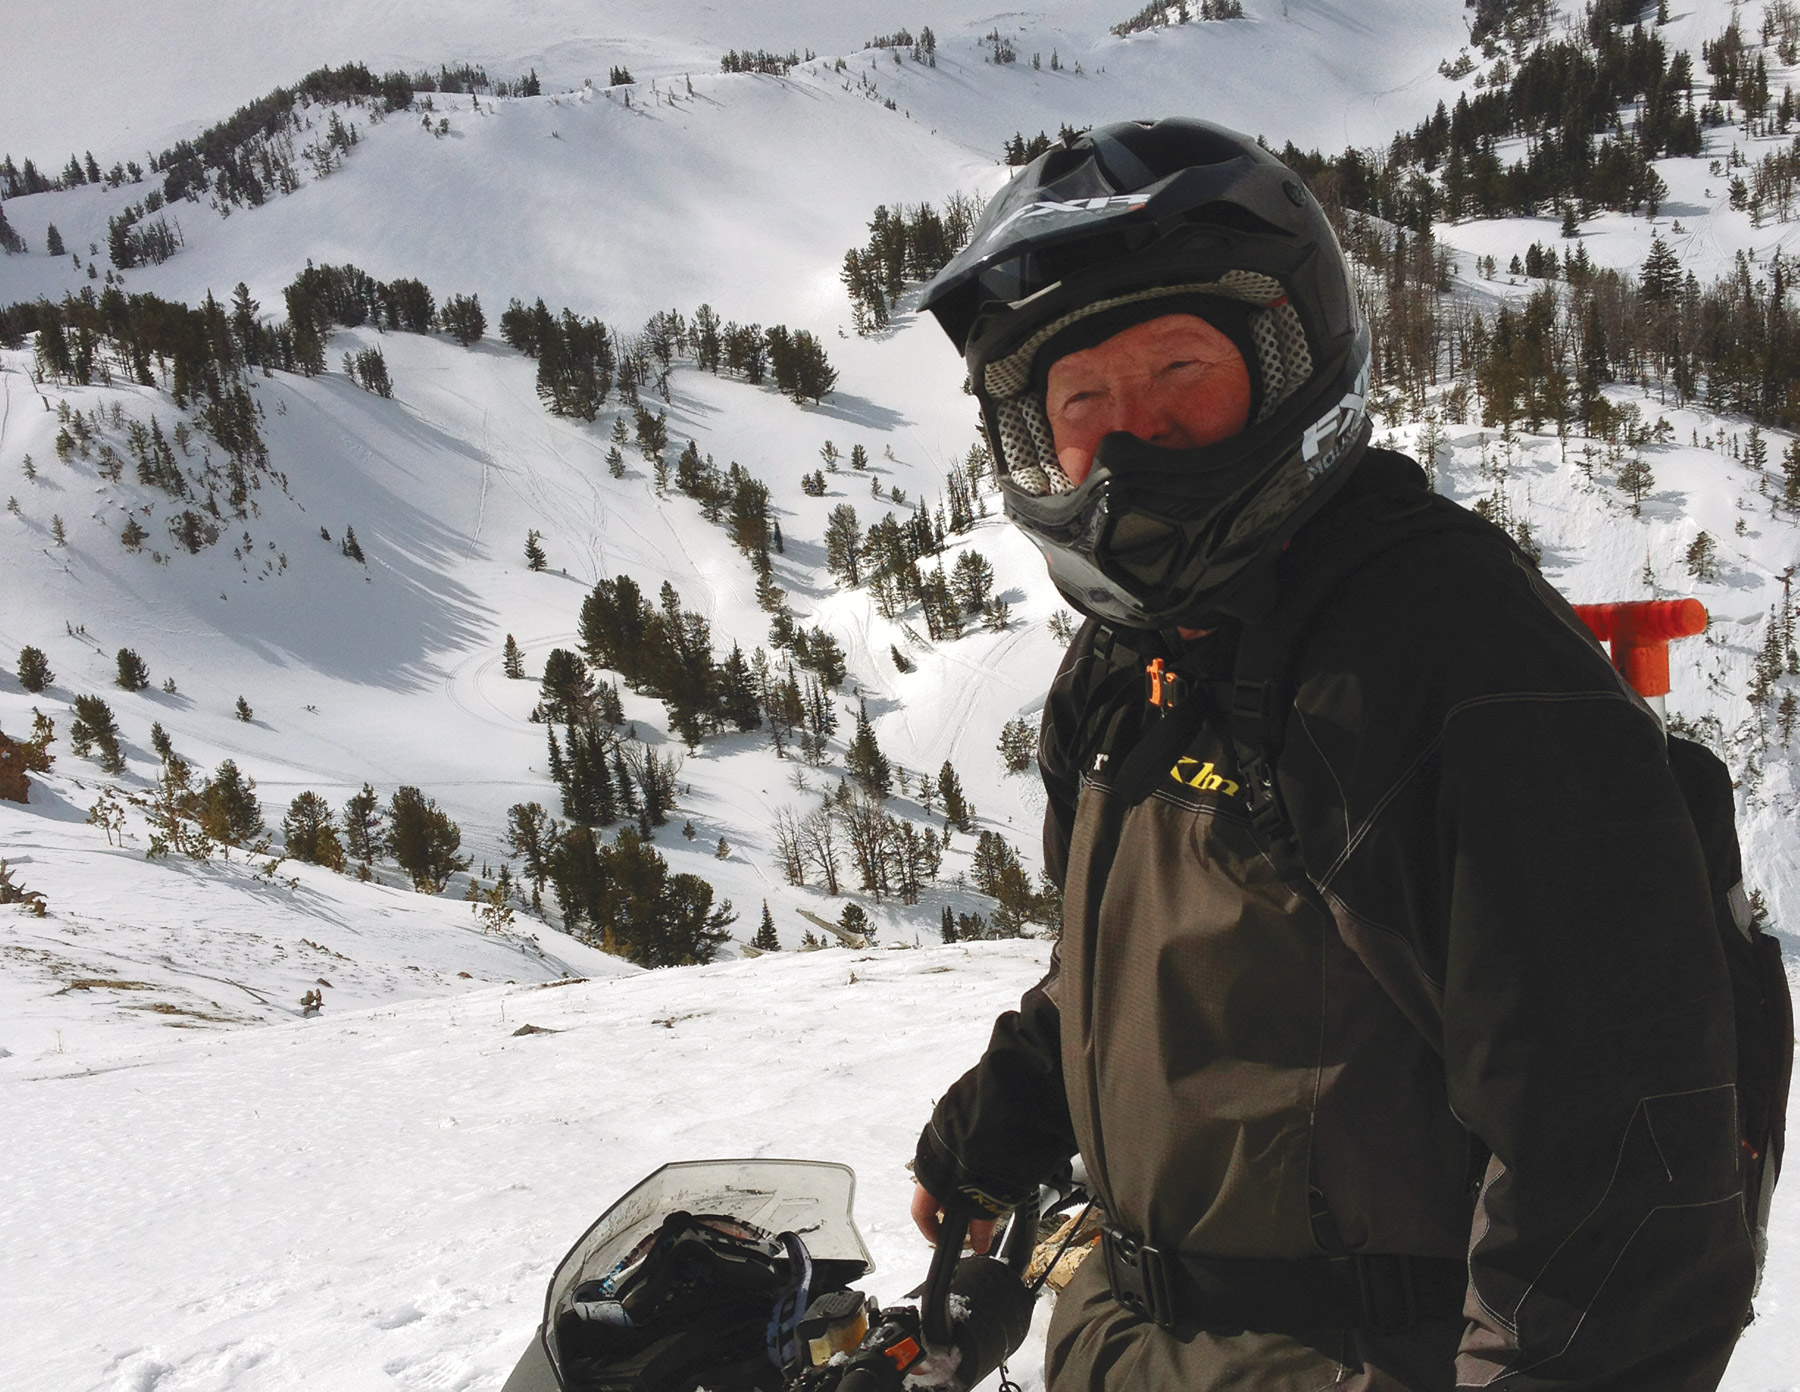 Steve Janes wearing a helmet and ski gear on a snowy ski slope with a snowmobile